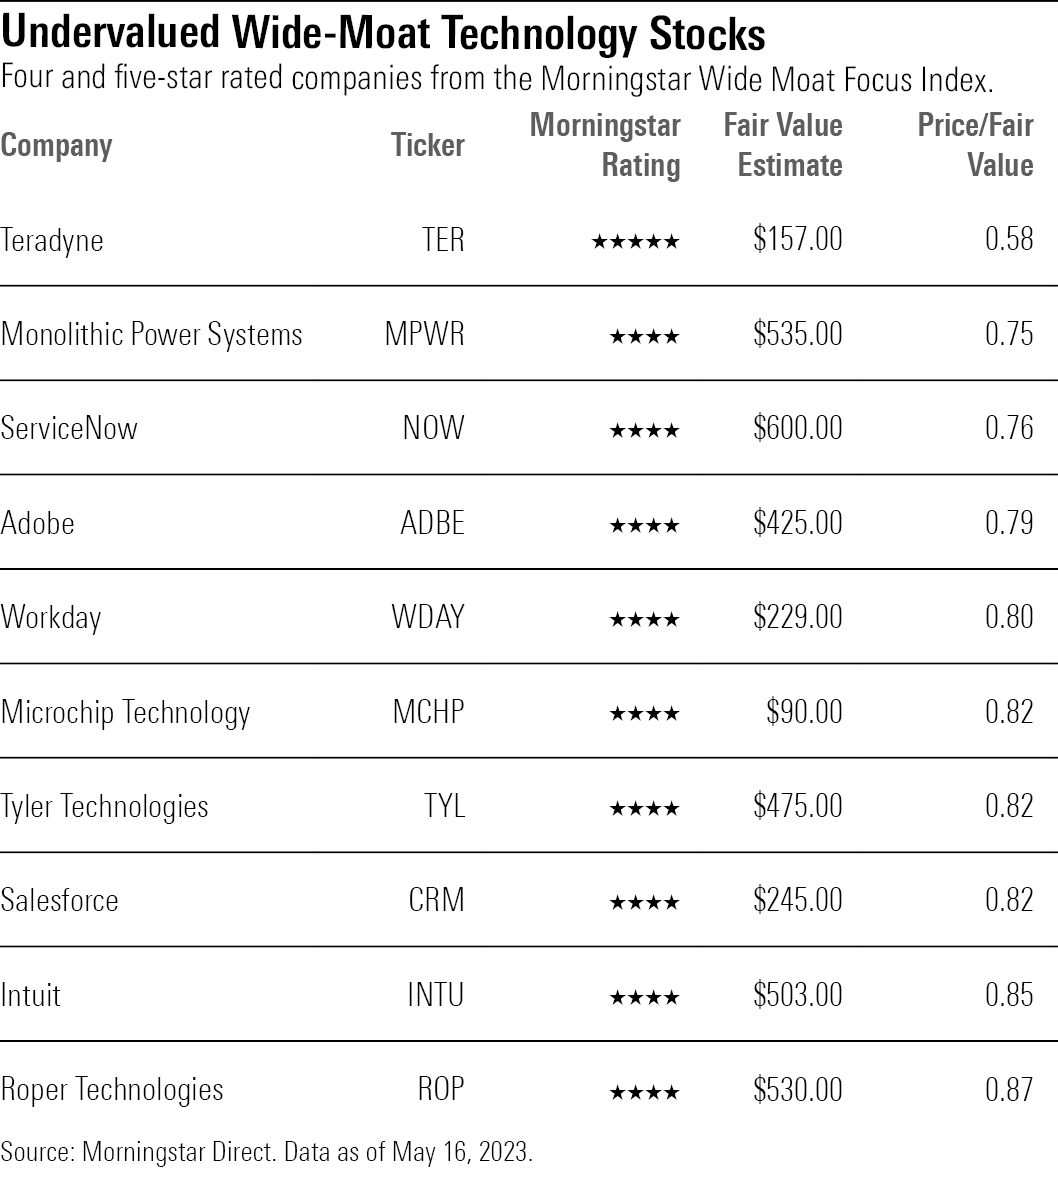 List of all four and five star rated technology companies from the Morningstar Wide-Moat Focus Index